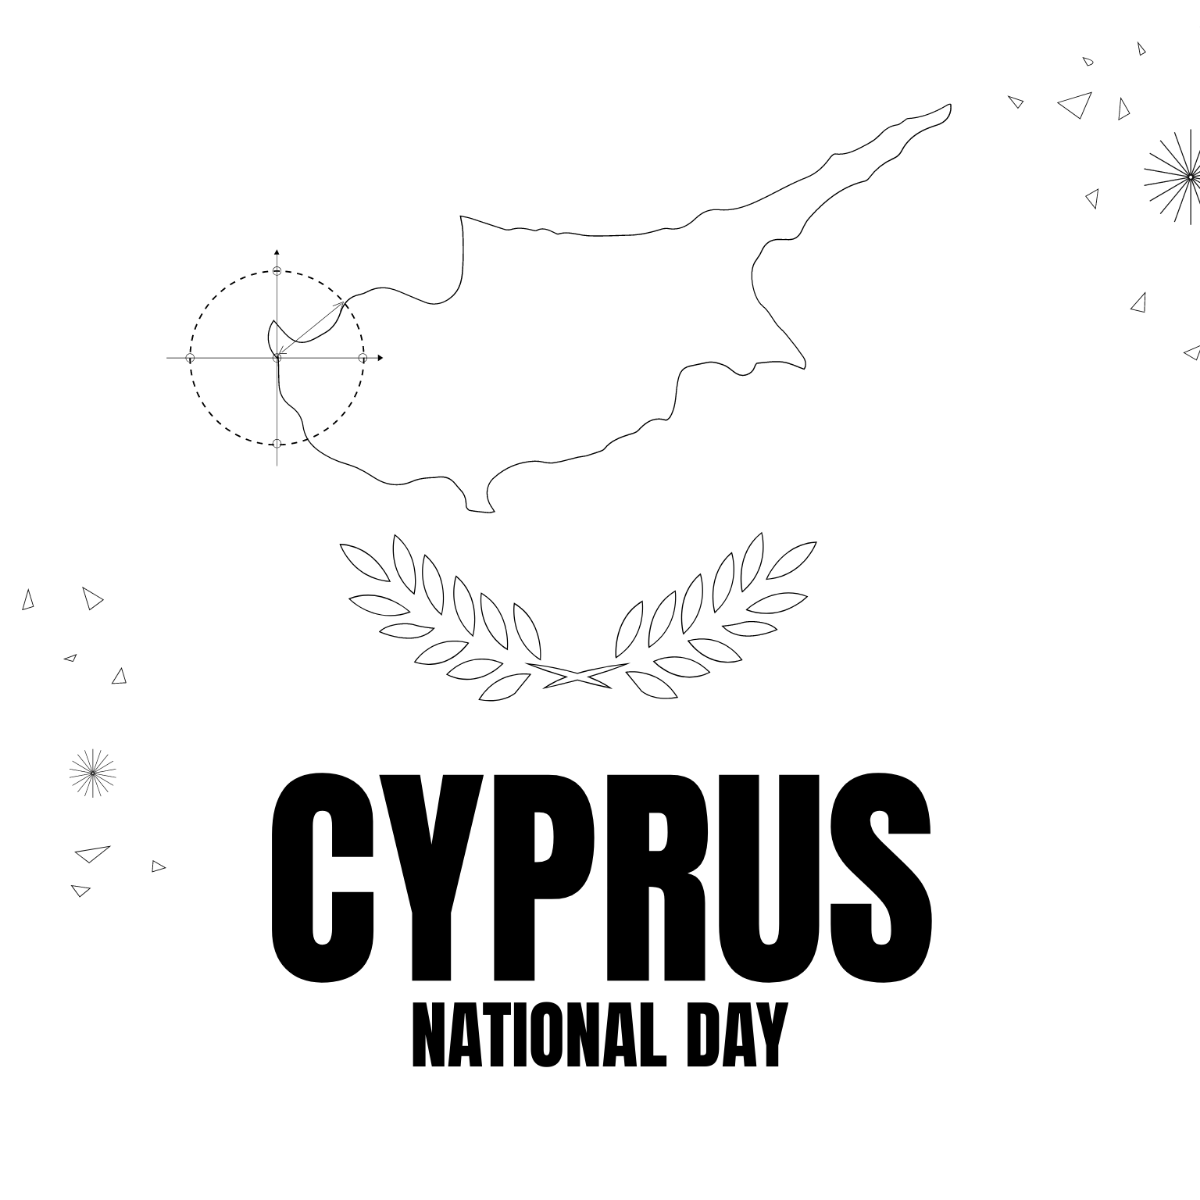 Free Cyprus National Day Outline Template